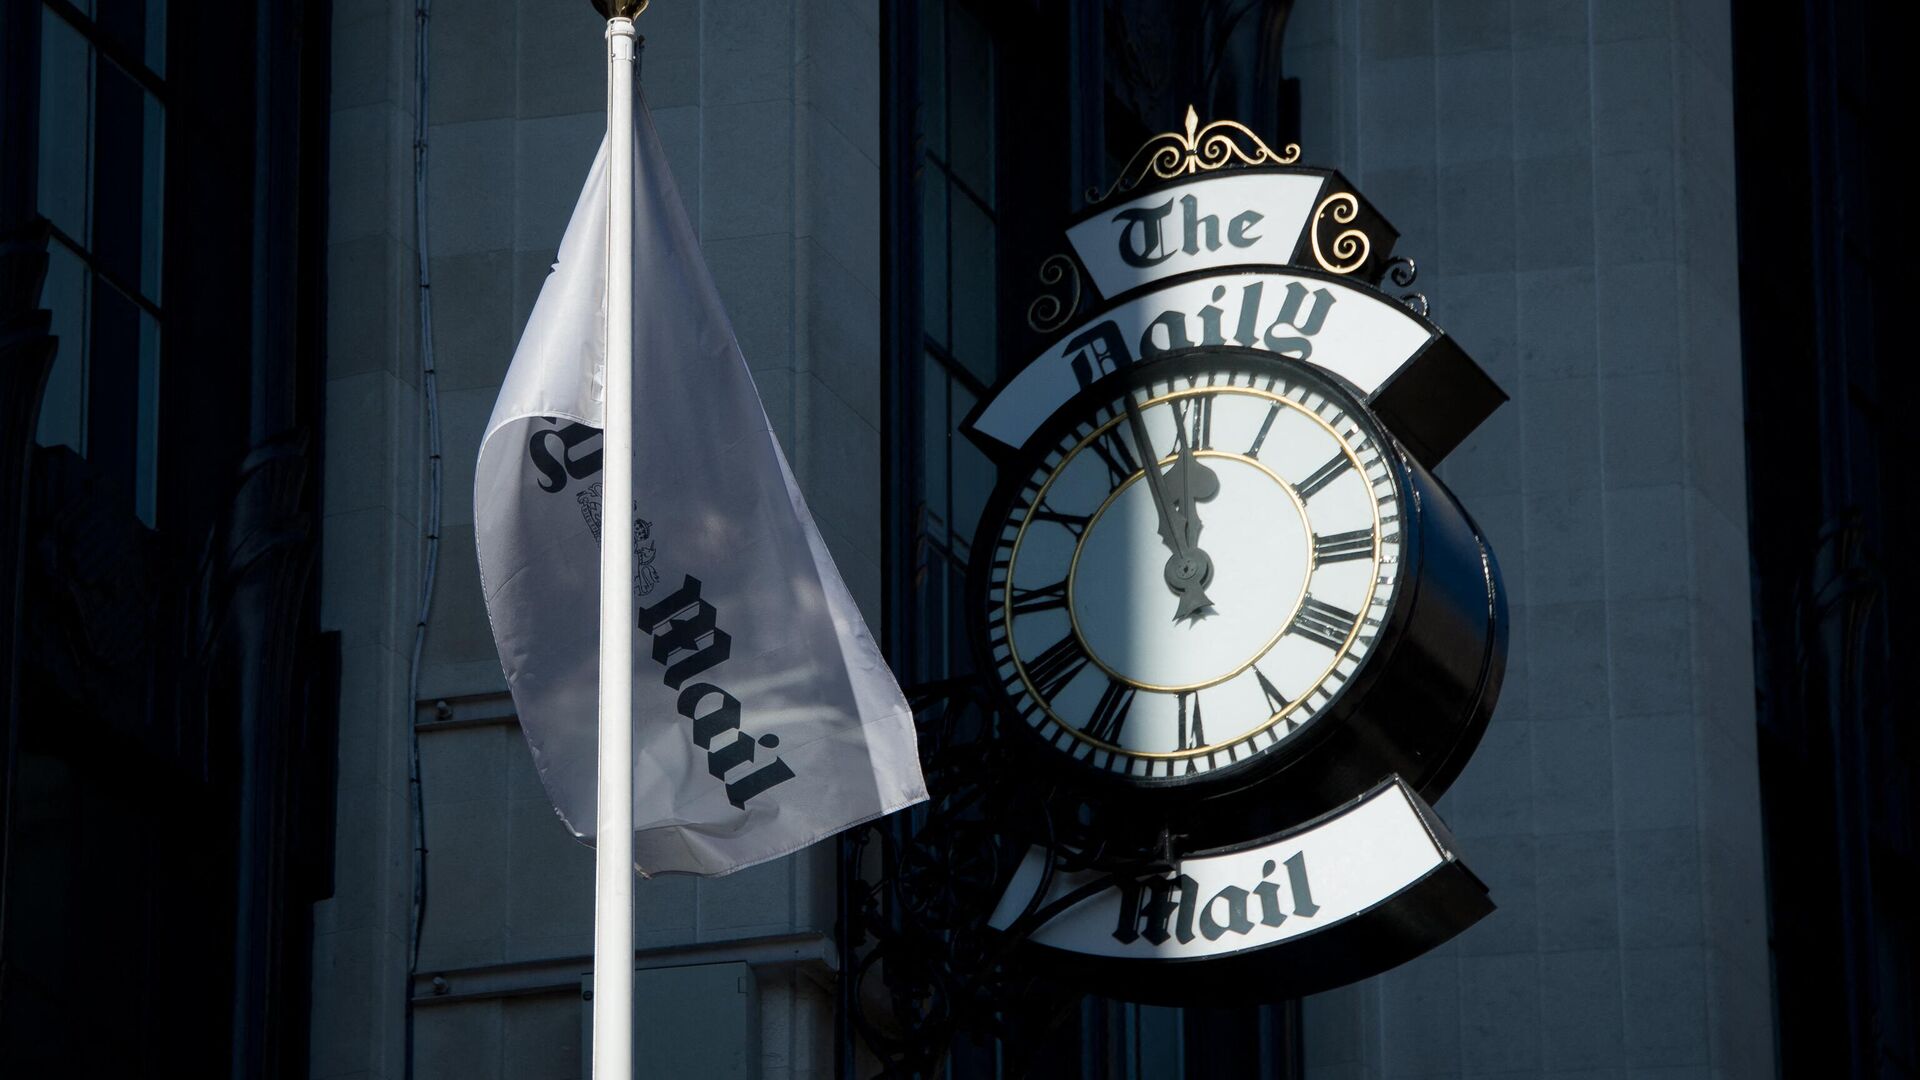 The Daily Mail flag and clock are shown above the demonstrators outside the headquarters of UK newspaper The Daily Mail in London, England, on October 6, 2013 who were there to protest against recent articles regarding the father of Labour party leader Ed Miliband. - Sputnik International, 1920, 27.03.2022